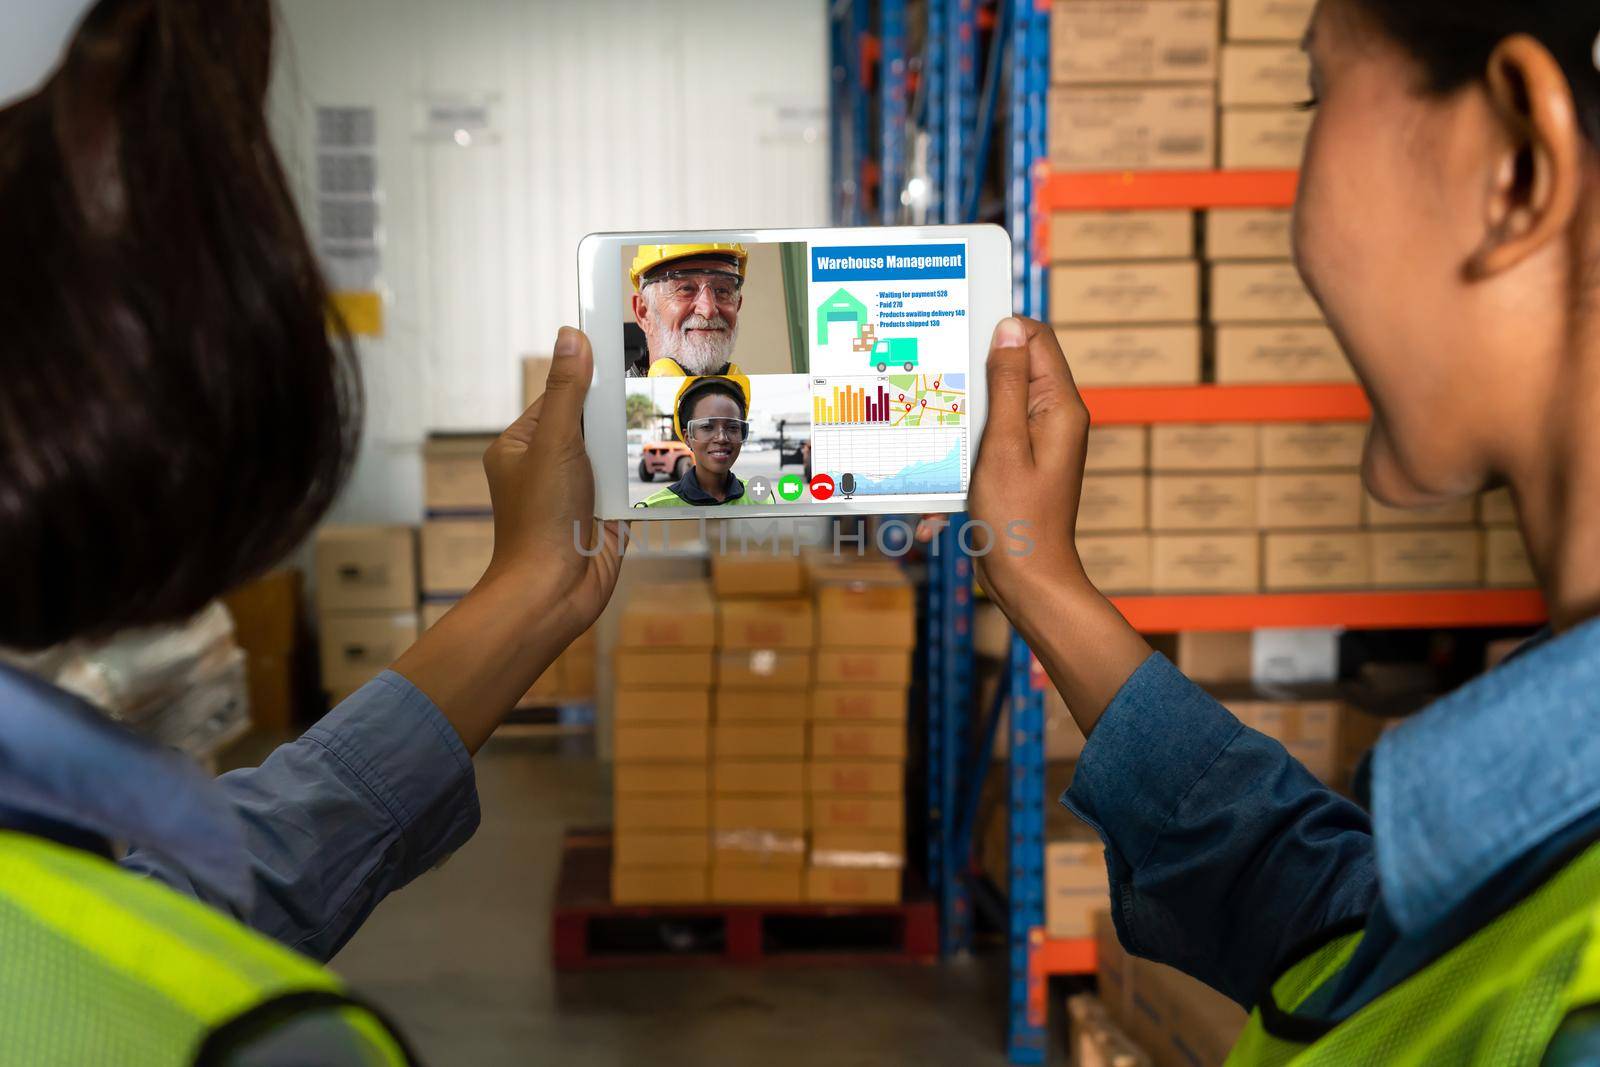 Warehouse staff talking on video call at computer screen in storage warehouse by biancoblue